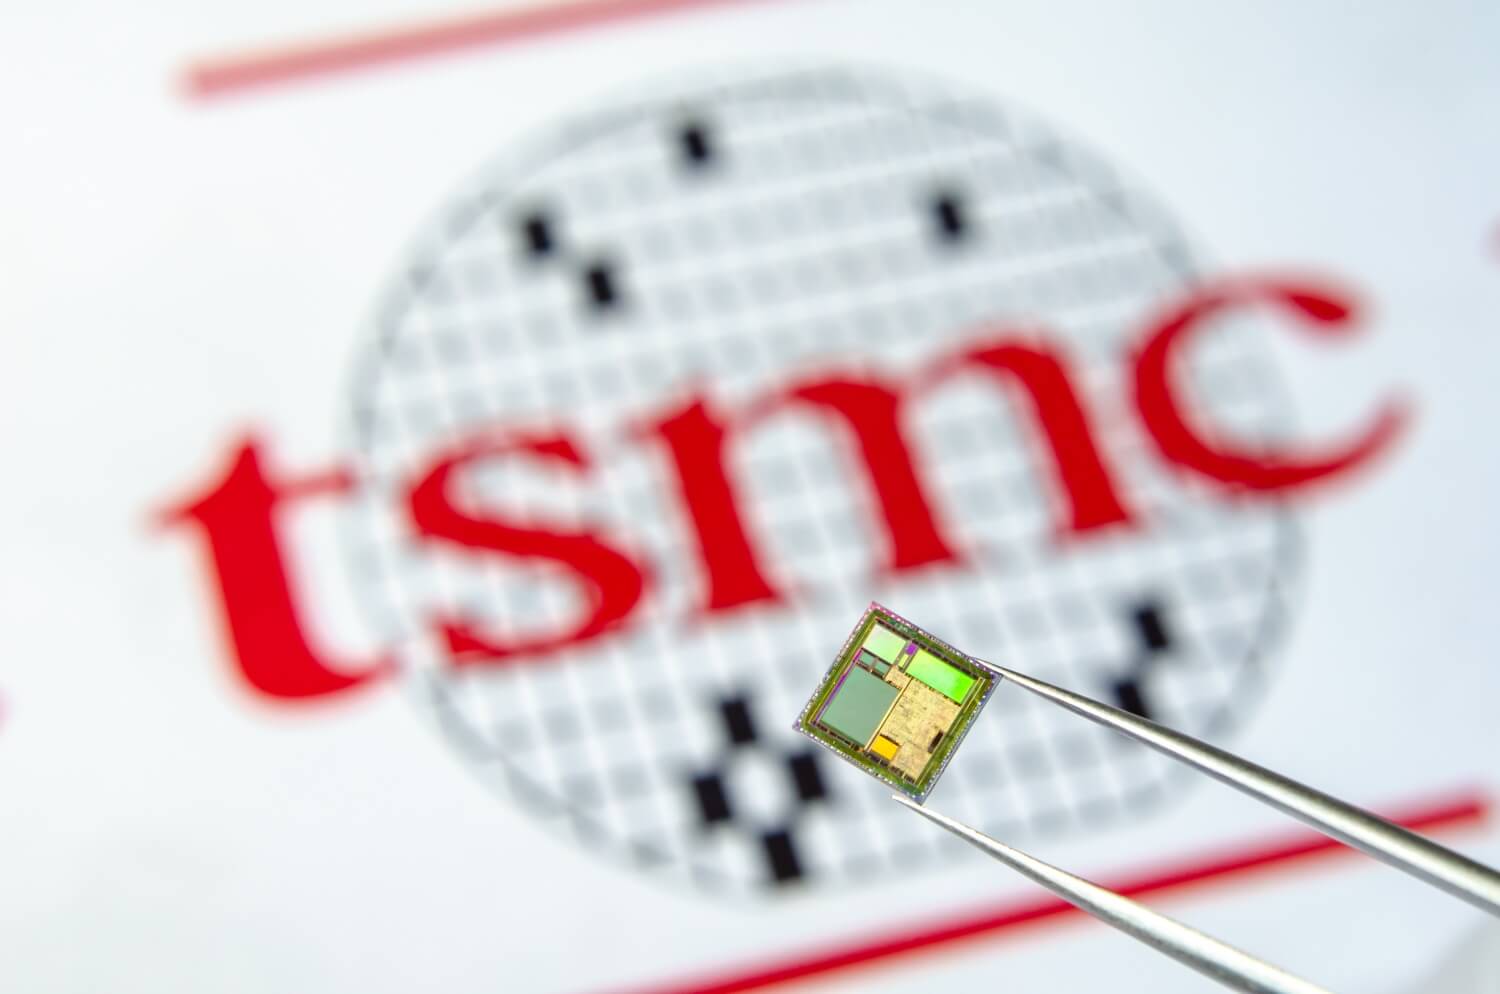 TSMC reportedly on schedule for 3nm process fabrication line installation